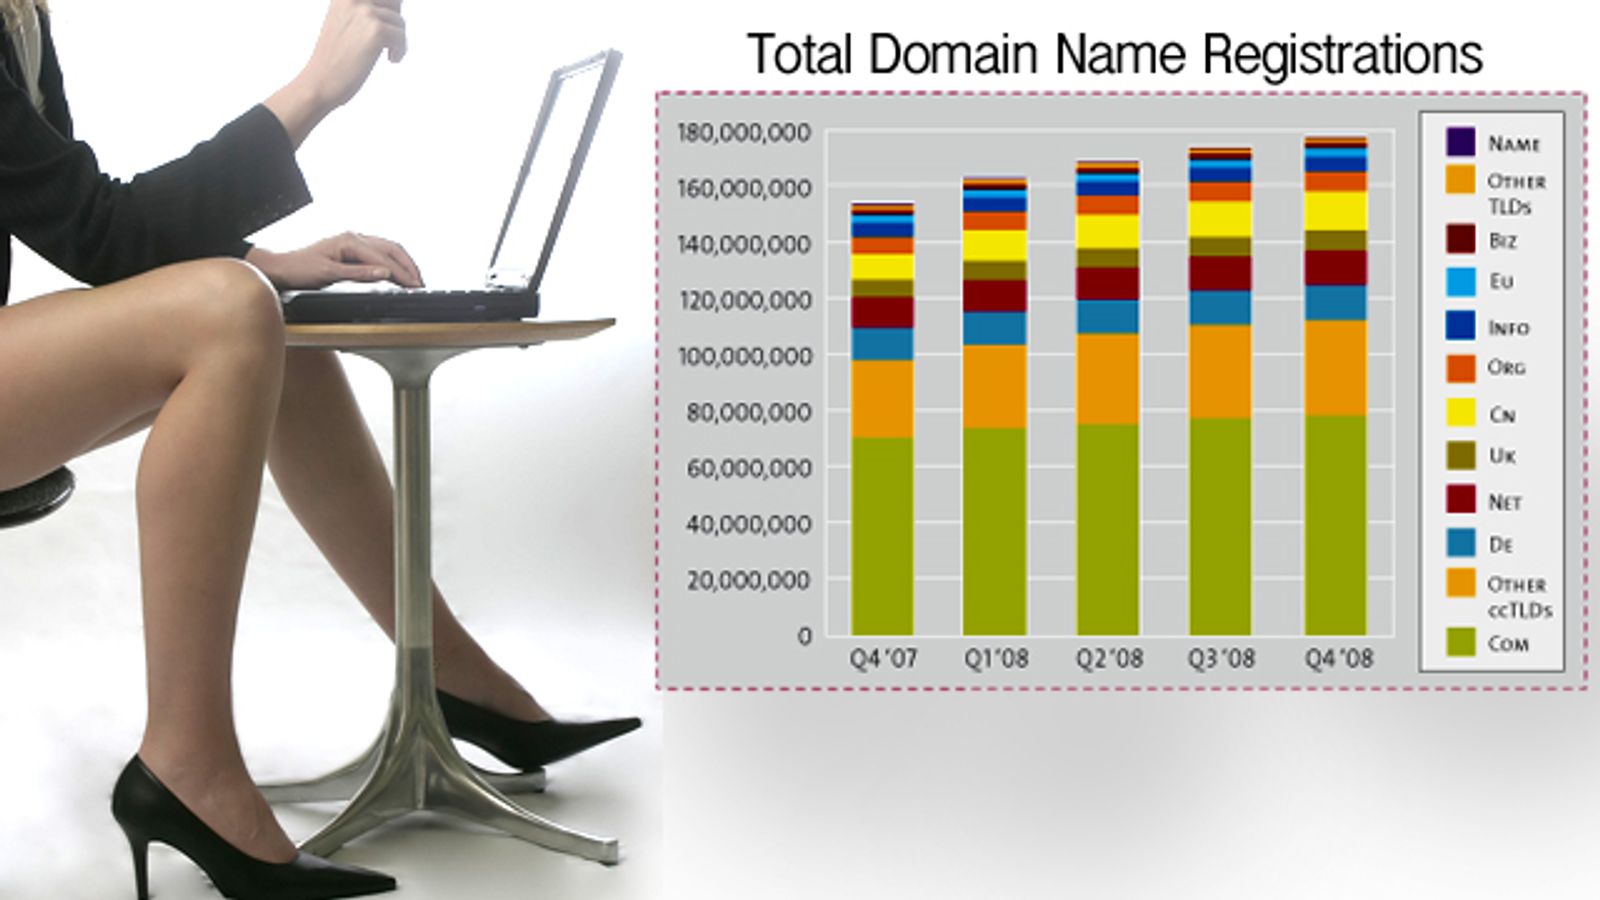 Verisign: Domain Registrations Up 16 Percent in 2008